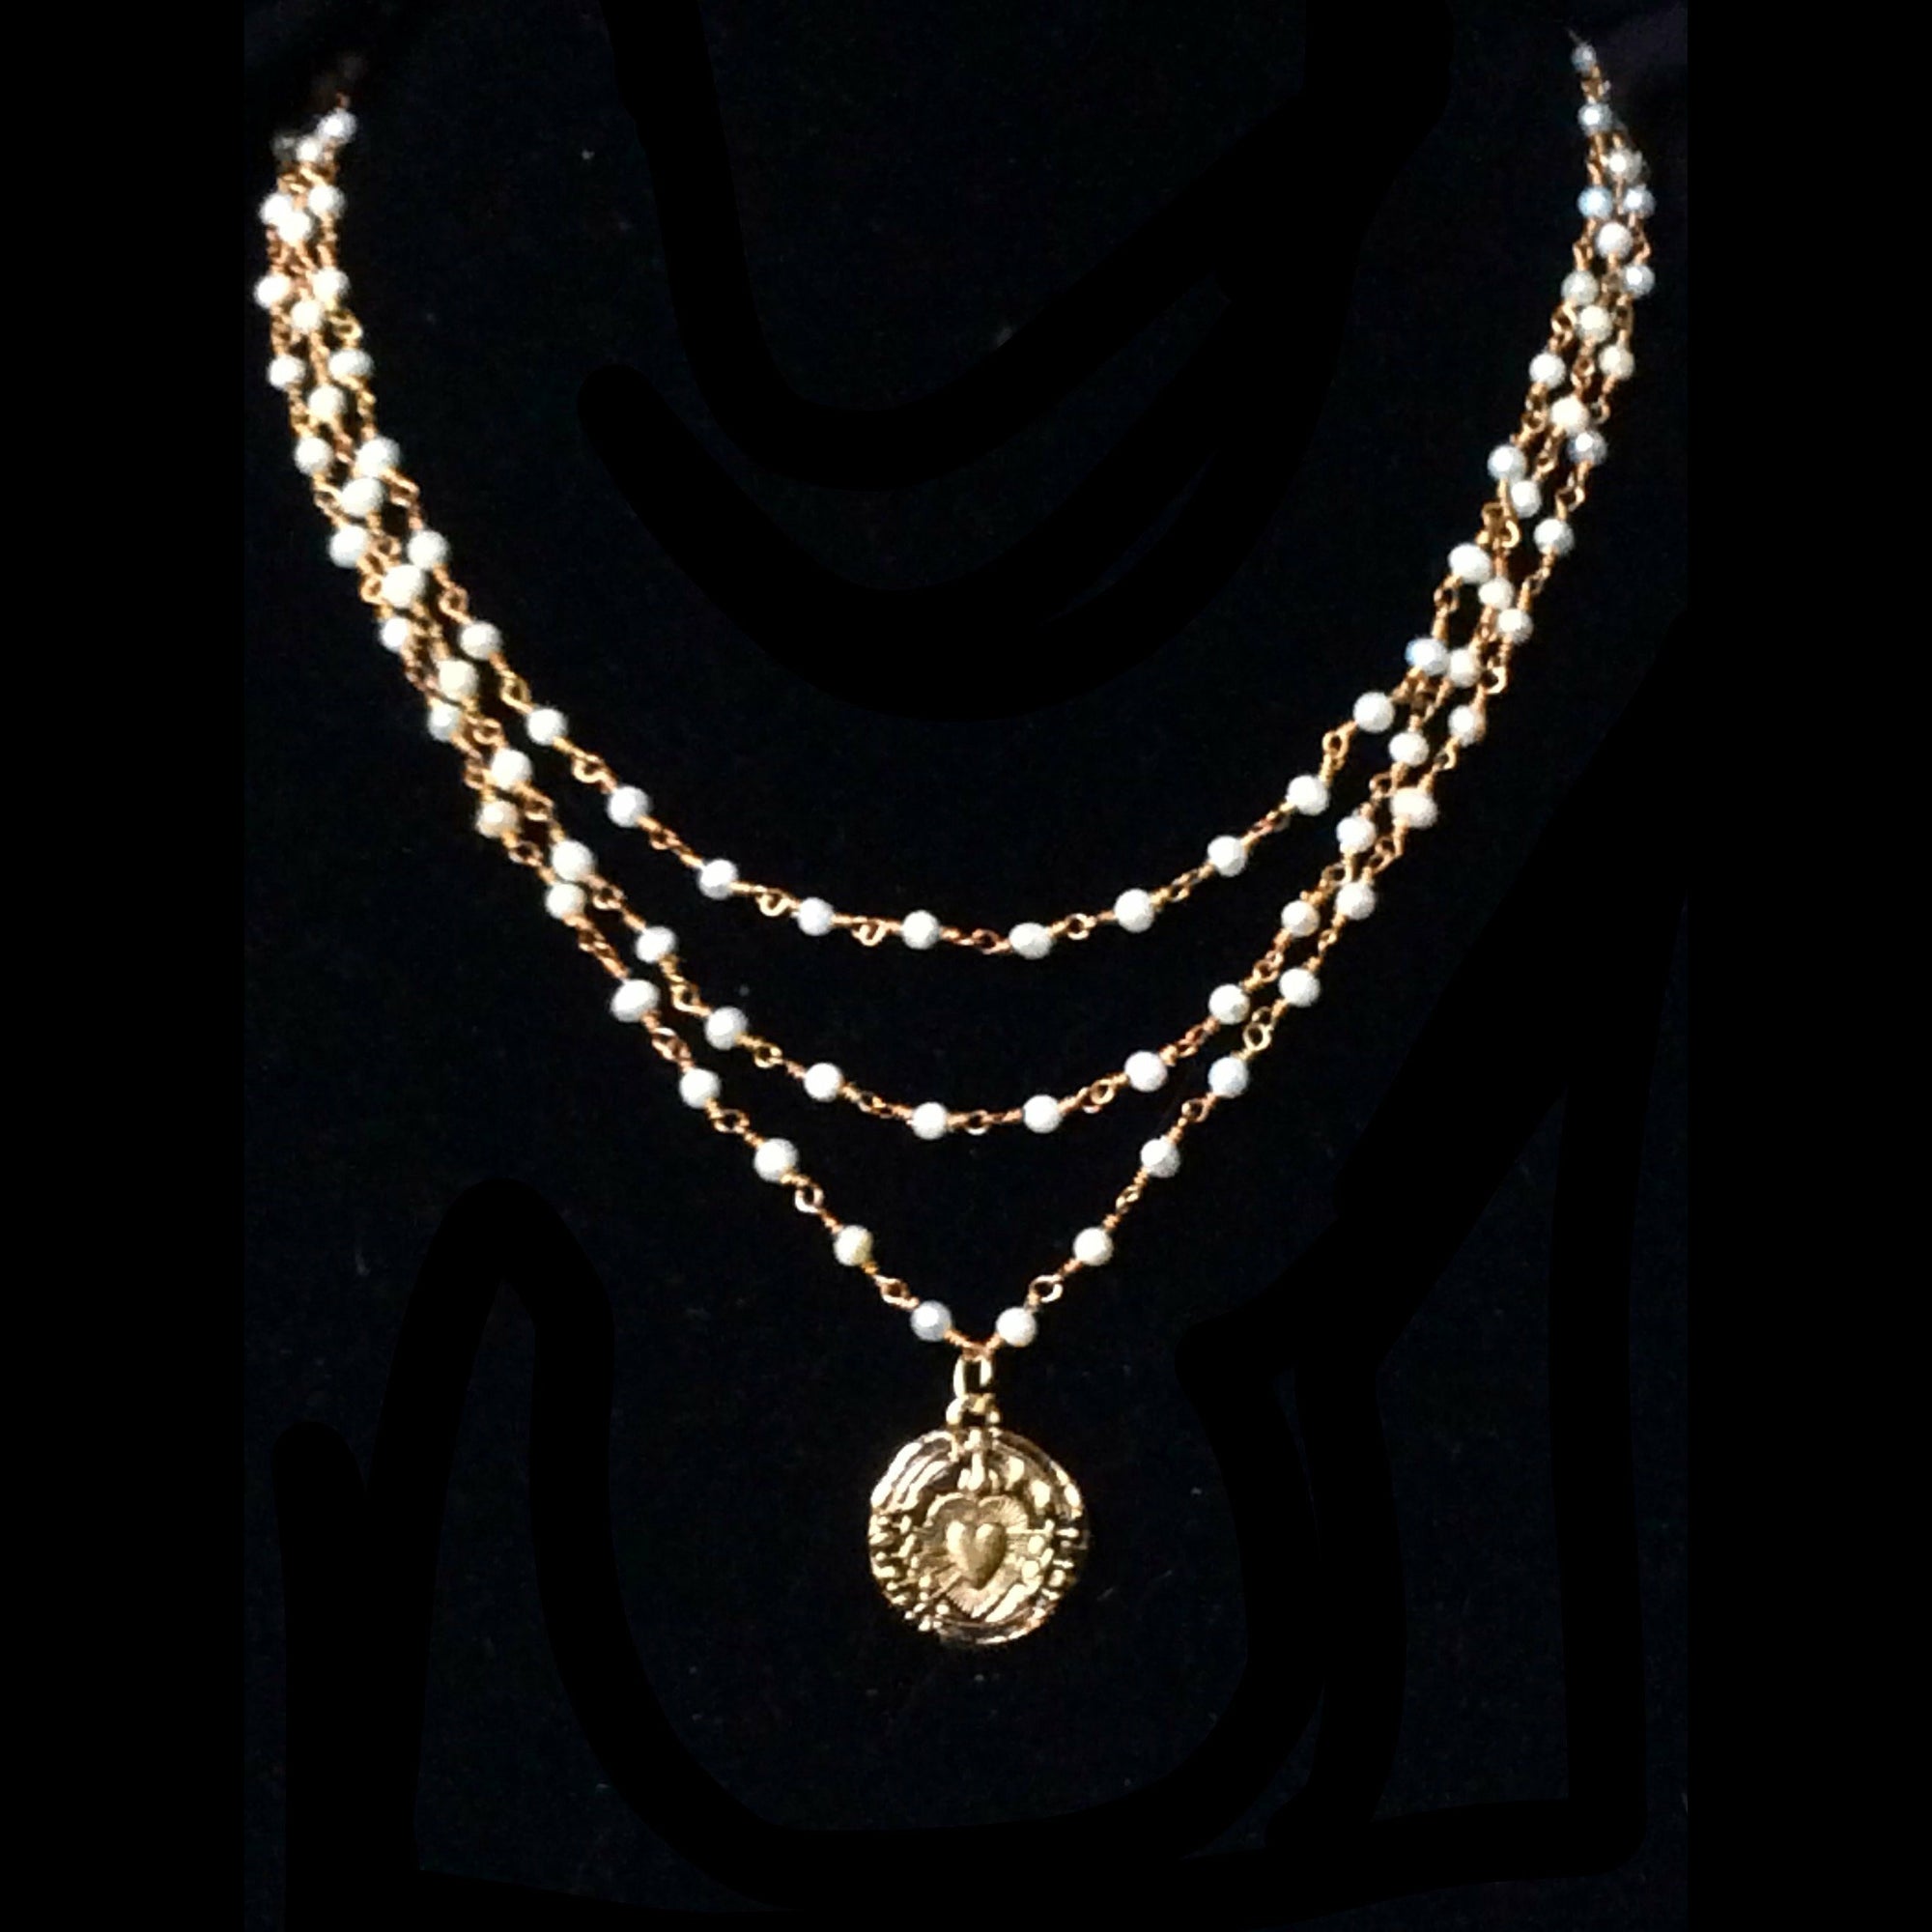 Trinity Immaculate Heart with Swords of Seven Sorrows Freshwater Pearl Necklace in Gold by Whispering Goddess